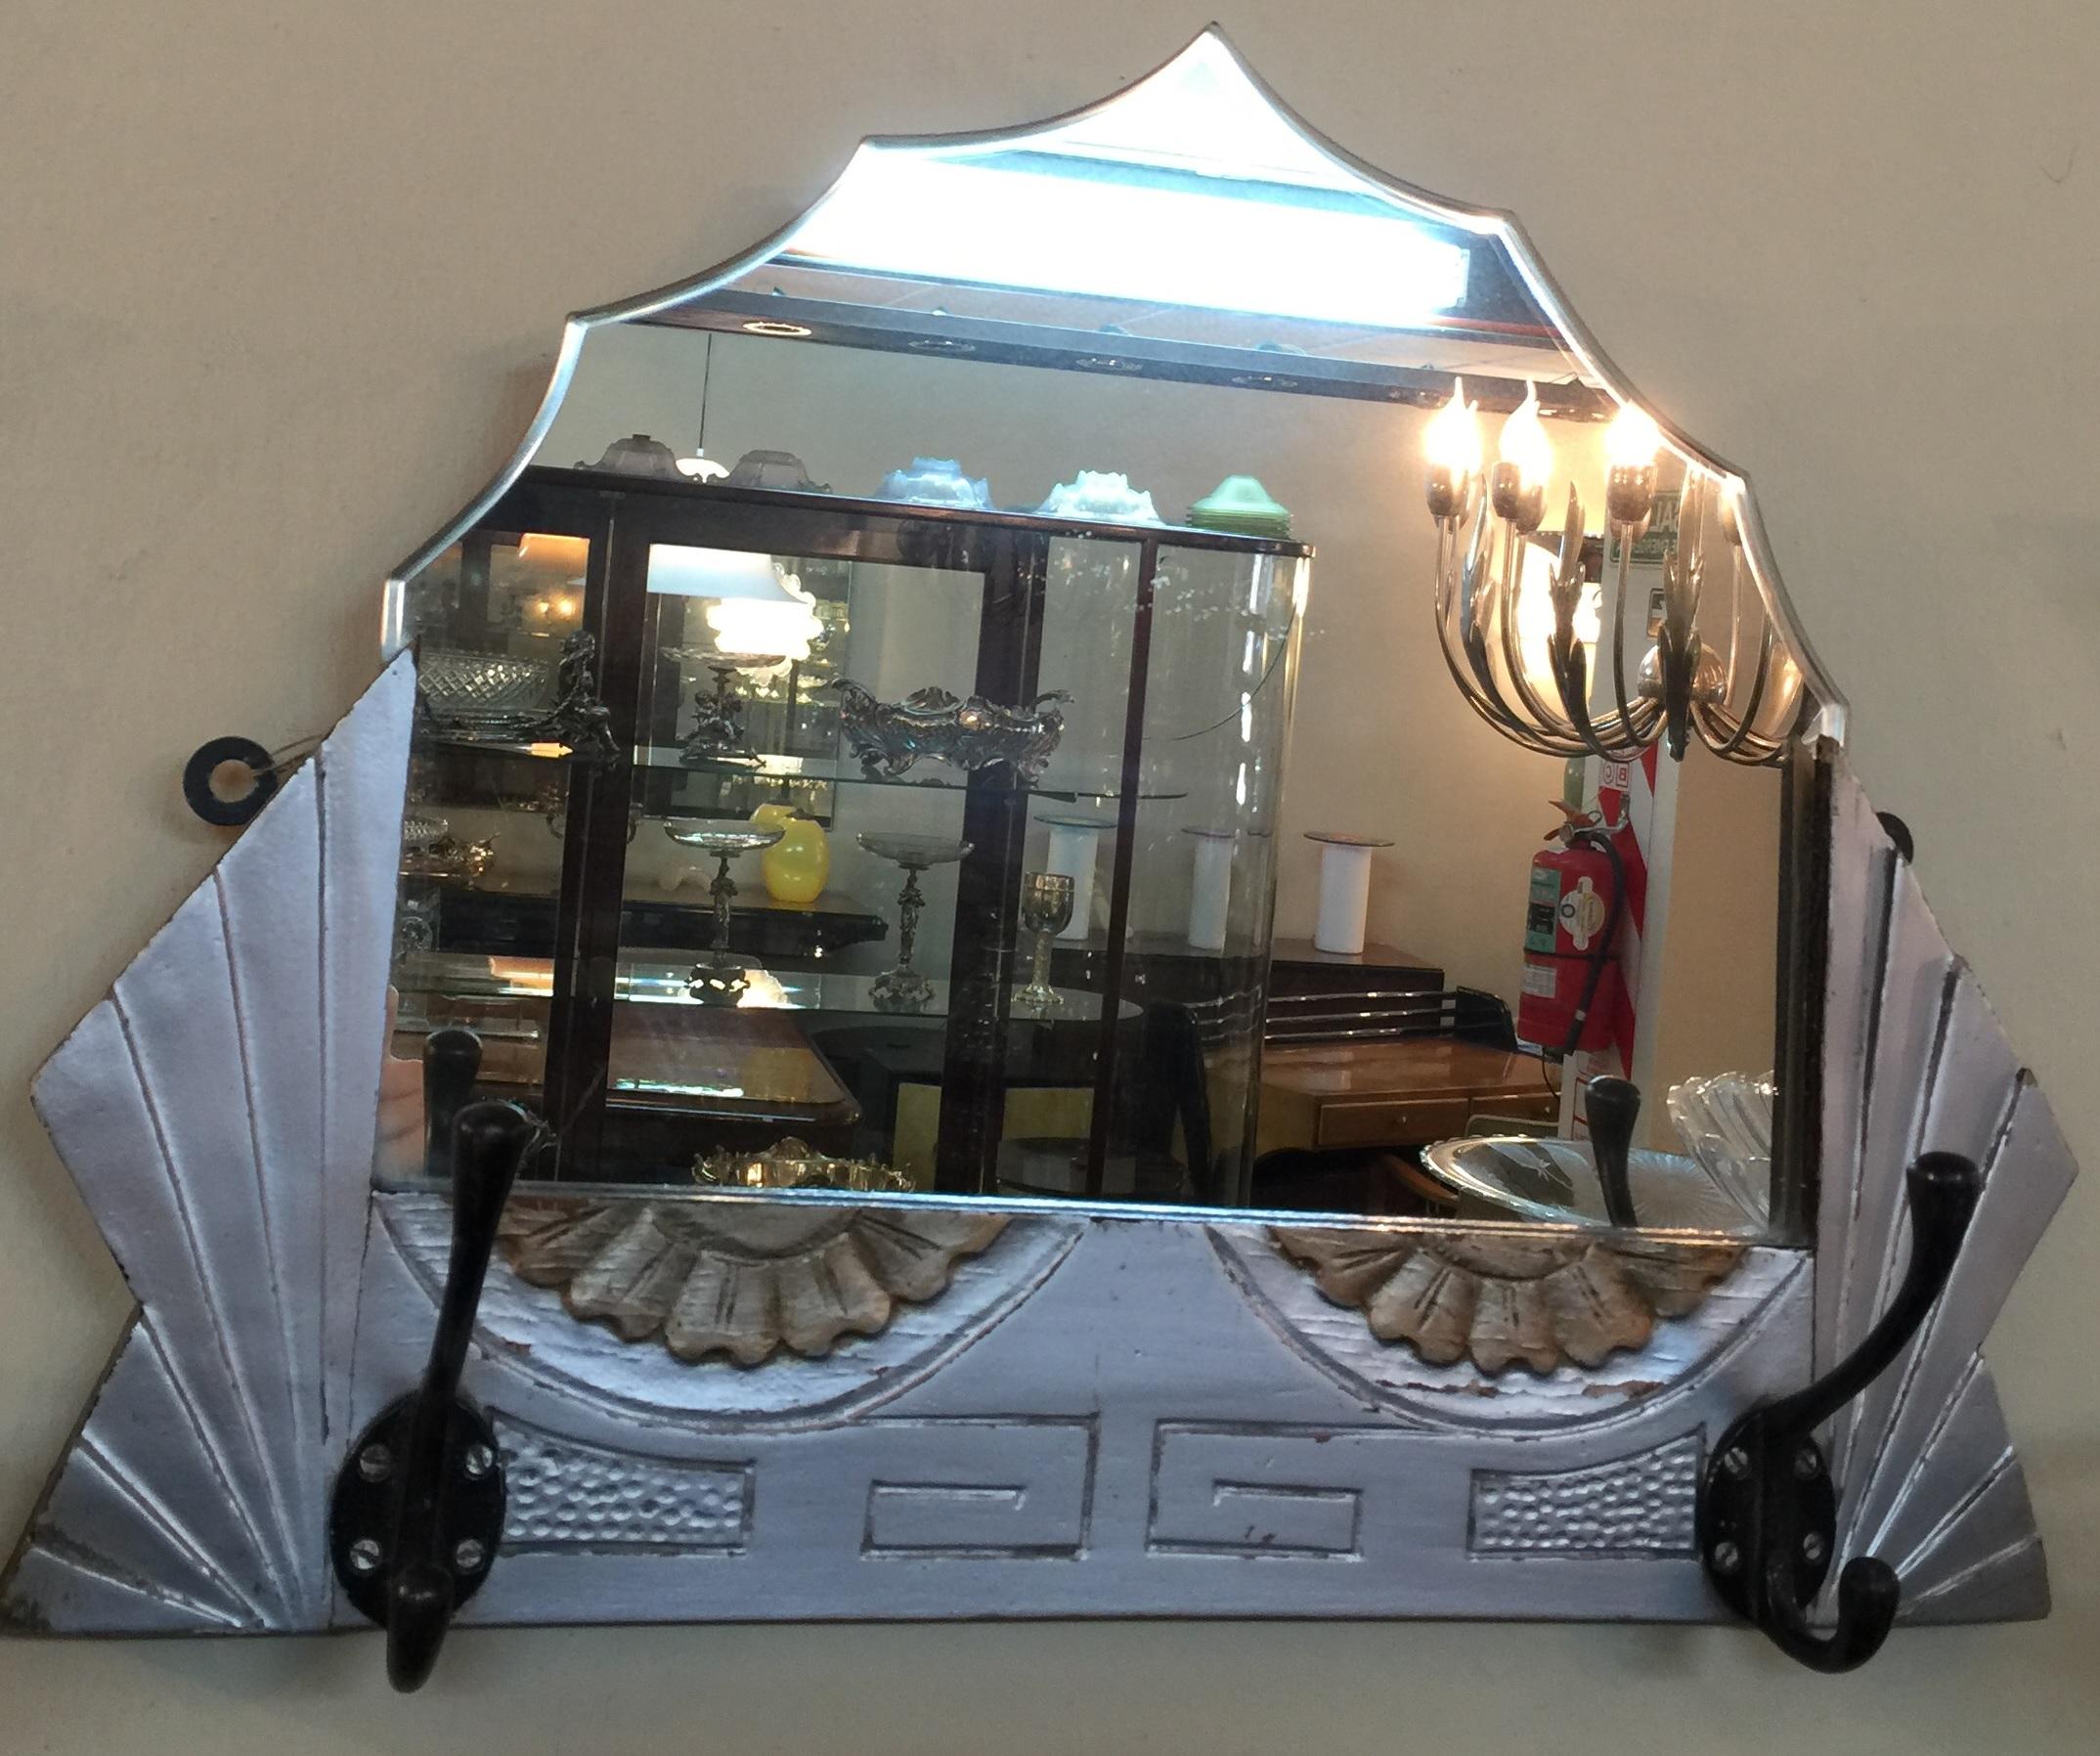 Amaizing mirror with coat rack.

Material: Wood and mirror
Style: Art Deco
Country: France
If you want to live in the golden years, this is the mirror that your project needs.
We have specialized in the sale of Art Deco and Art Nouveau and Vintage